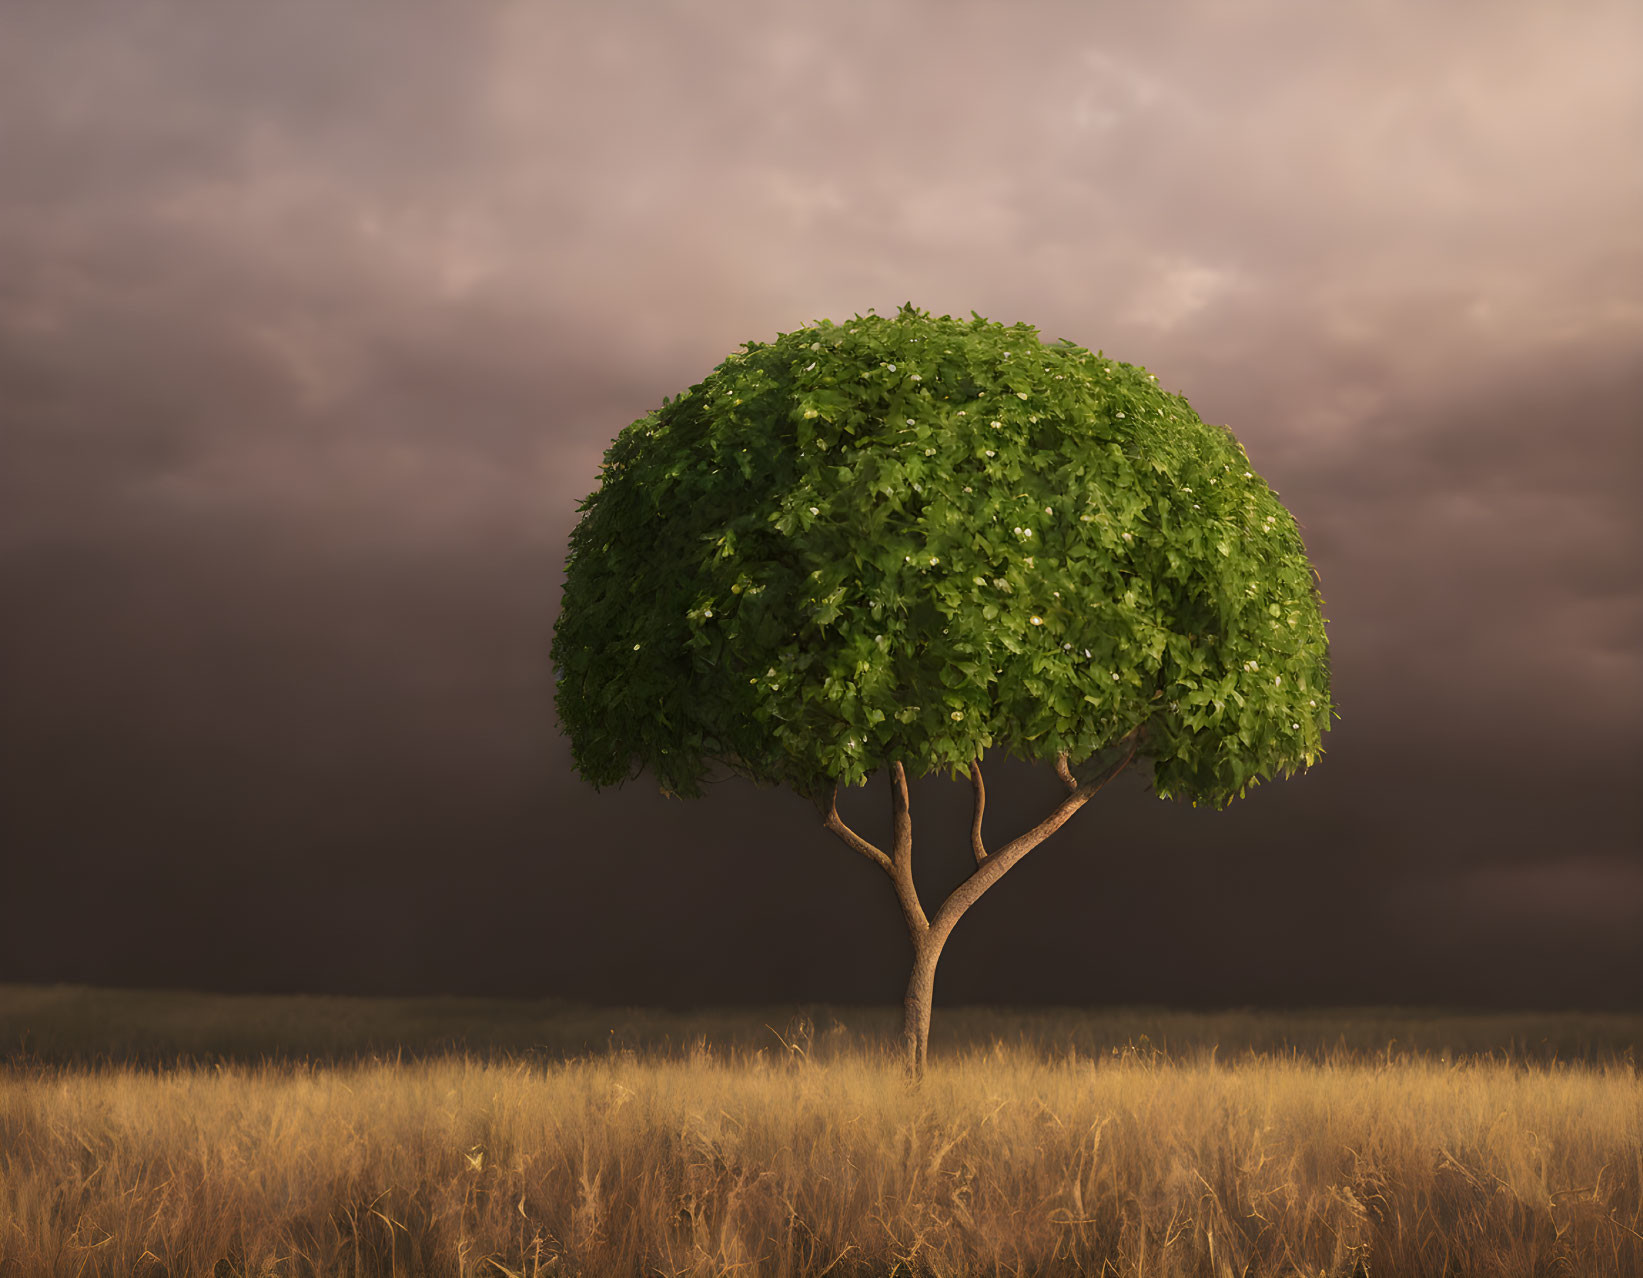 Solitary tree with lush green canopy in golden grass field under moody sky